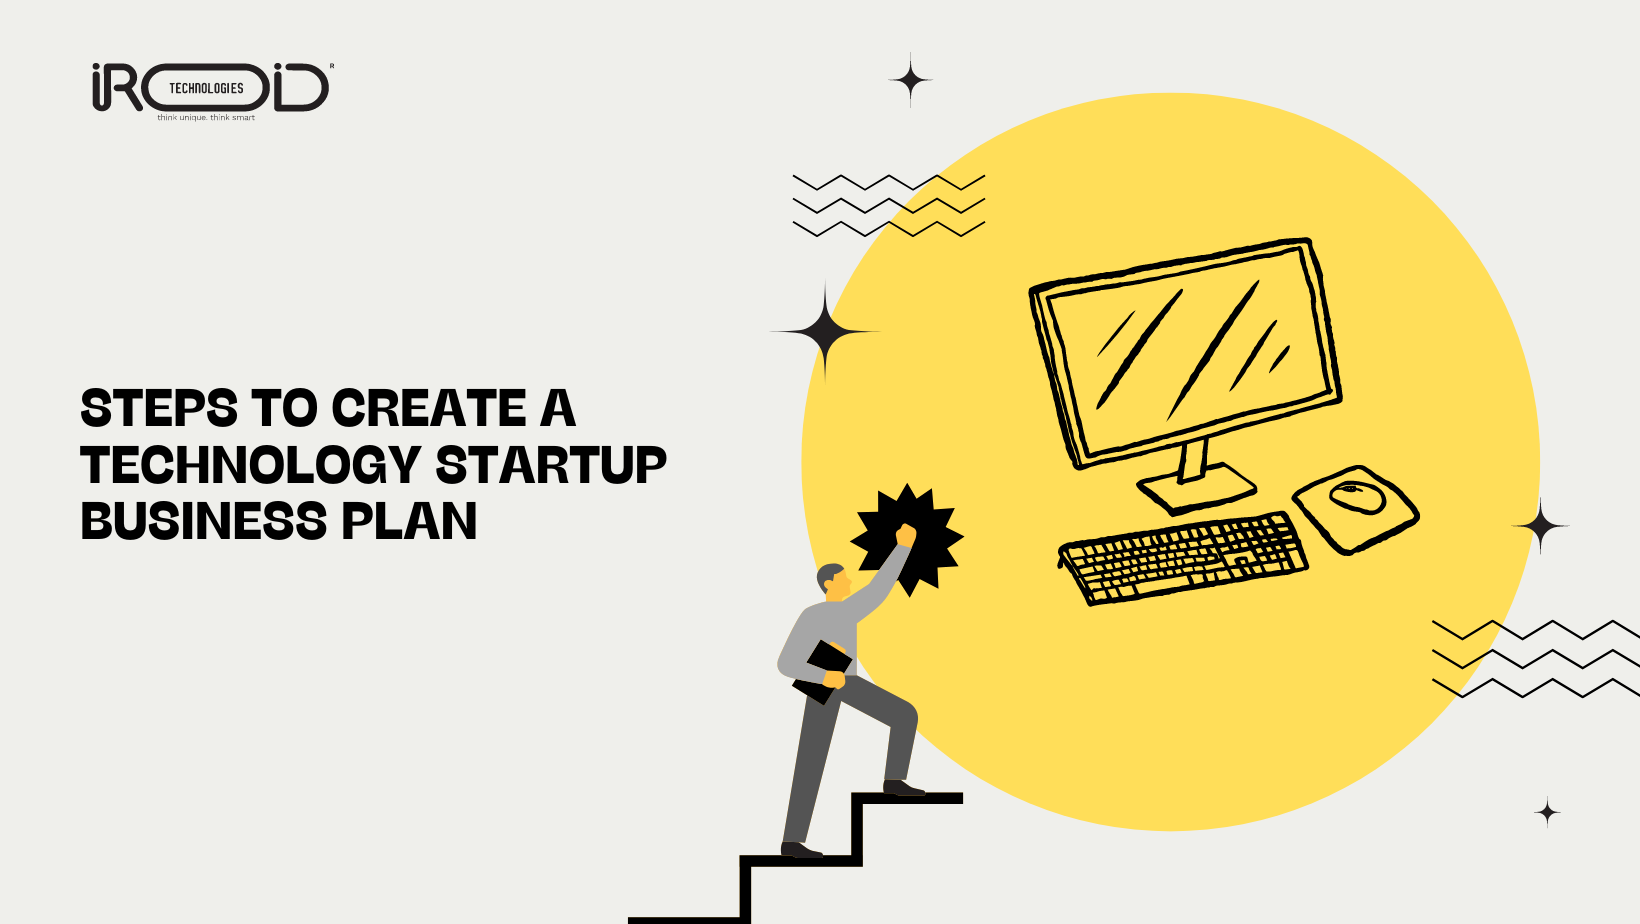 REDD +

< \
STEPS TO CREATE A
TECHNOLOGY STARTUP J
BUSINESS PLAN = aD